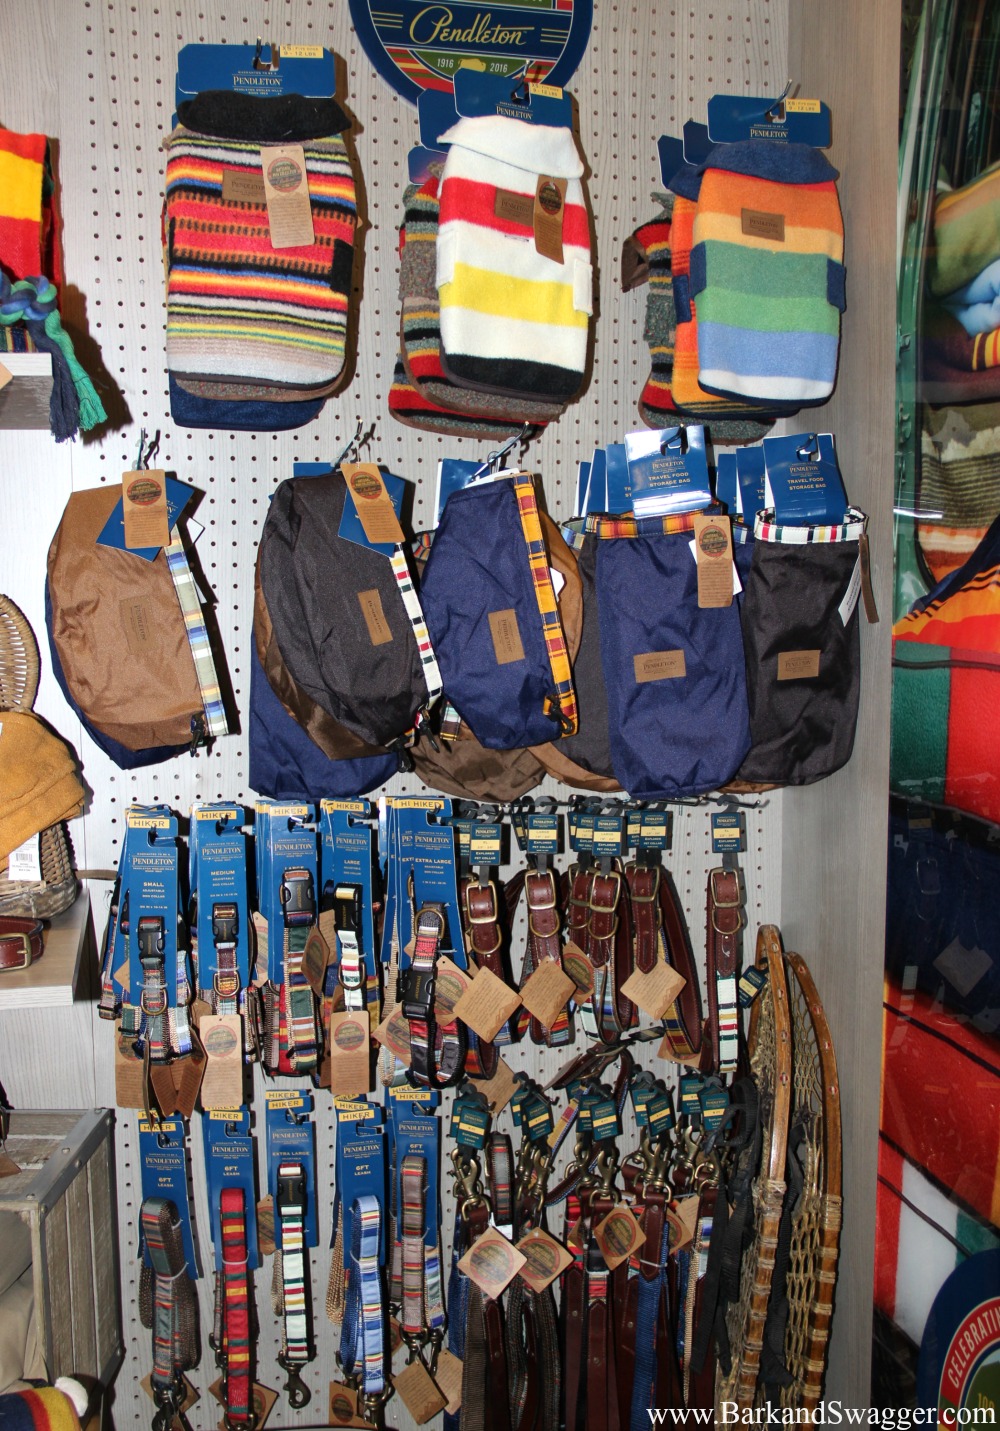 Dogs with style and their parents would love these products. Pendleton dog coats, collars, leashes and more. Gorgeous. 